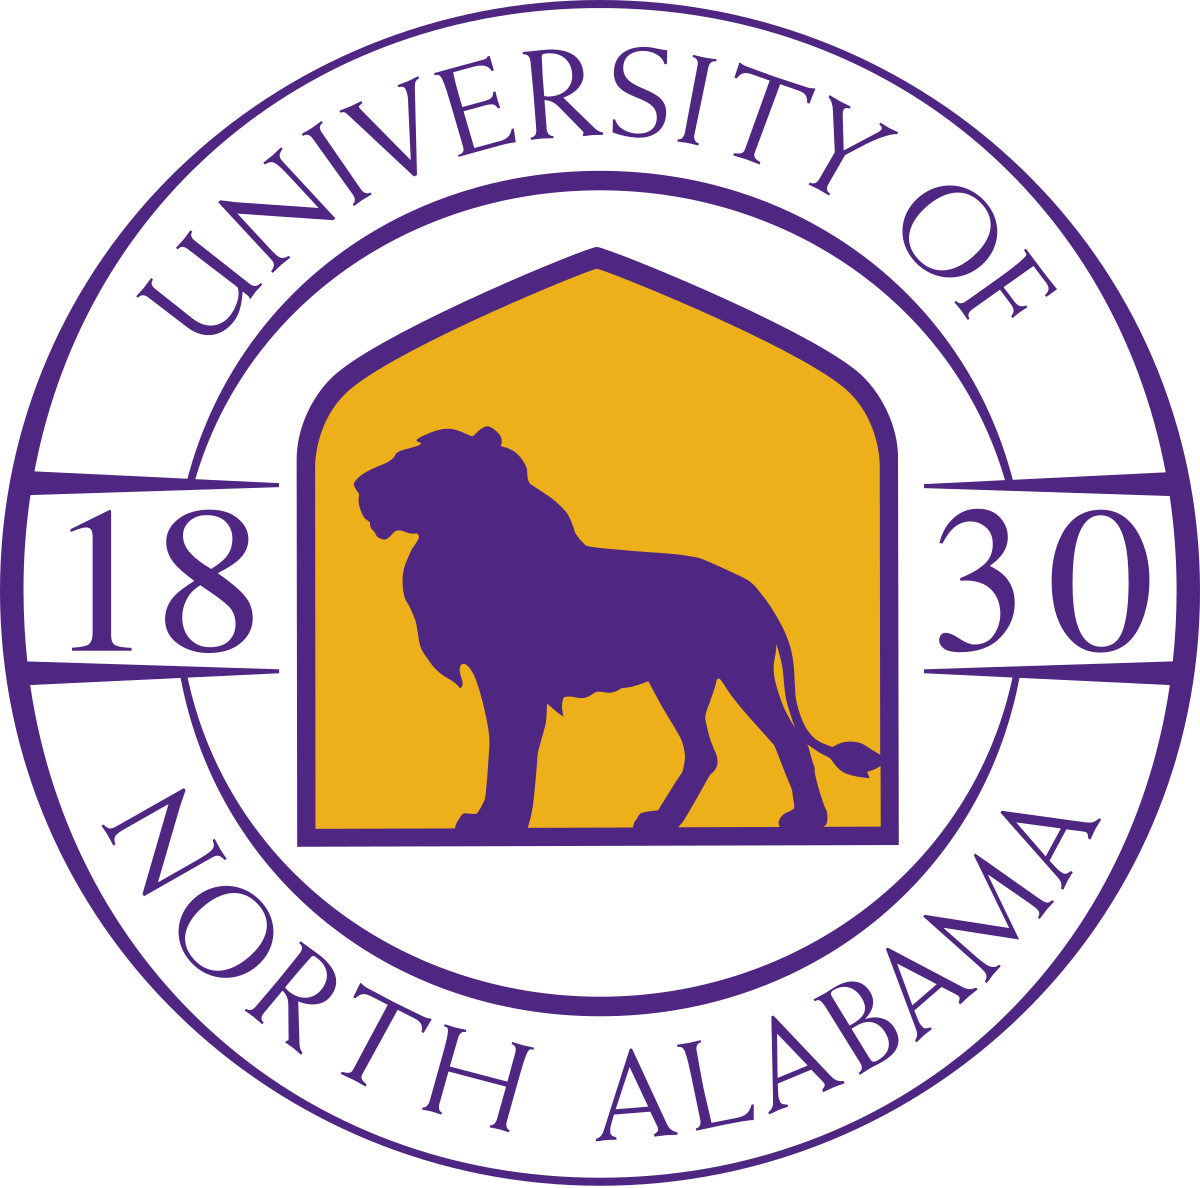 University Of North Alabama Wikiwand Jsu Tigers Paw - Immigration And Customs Enforcement (1200x1188)